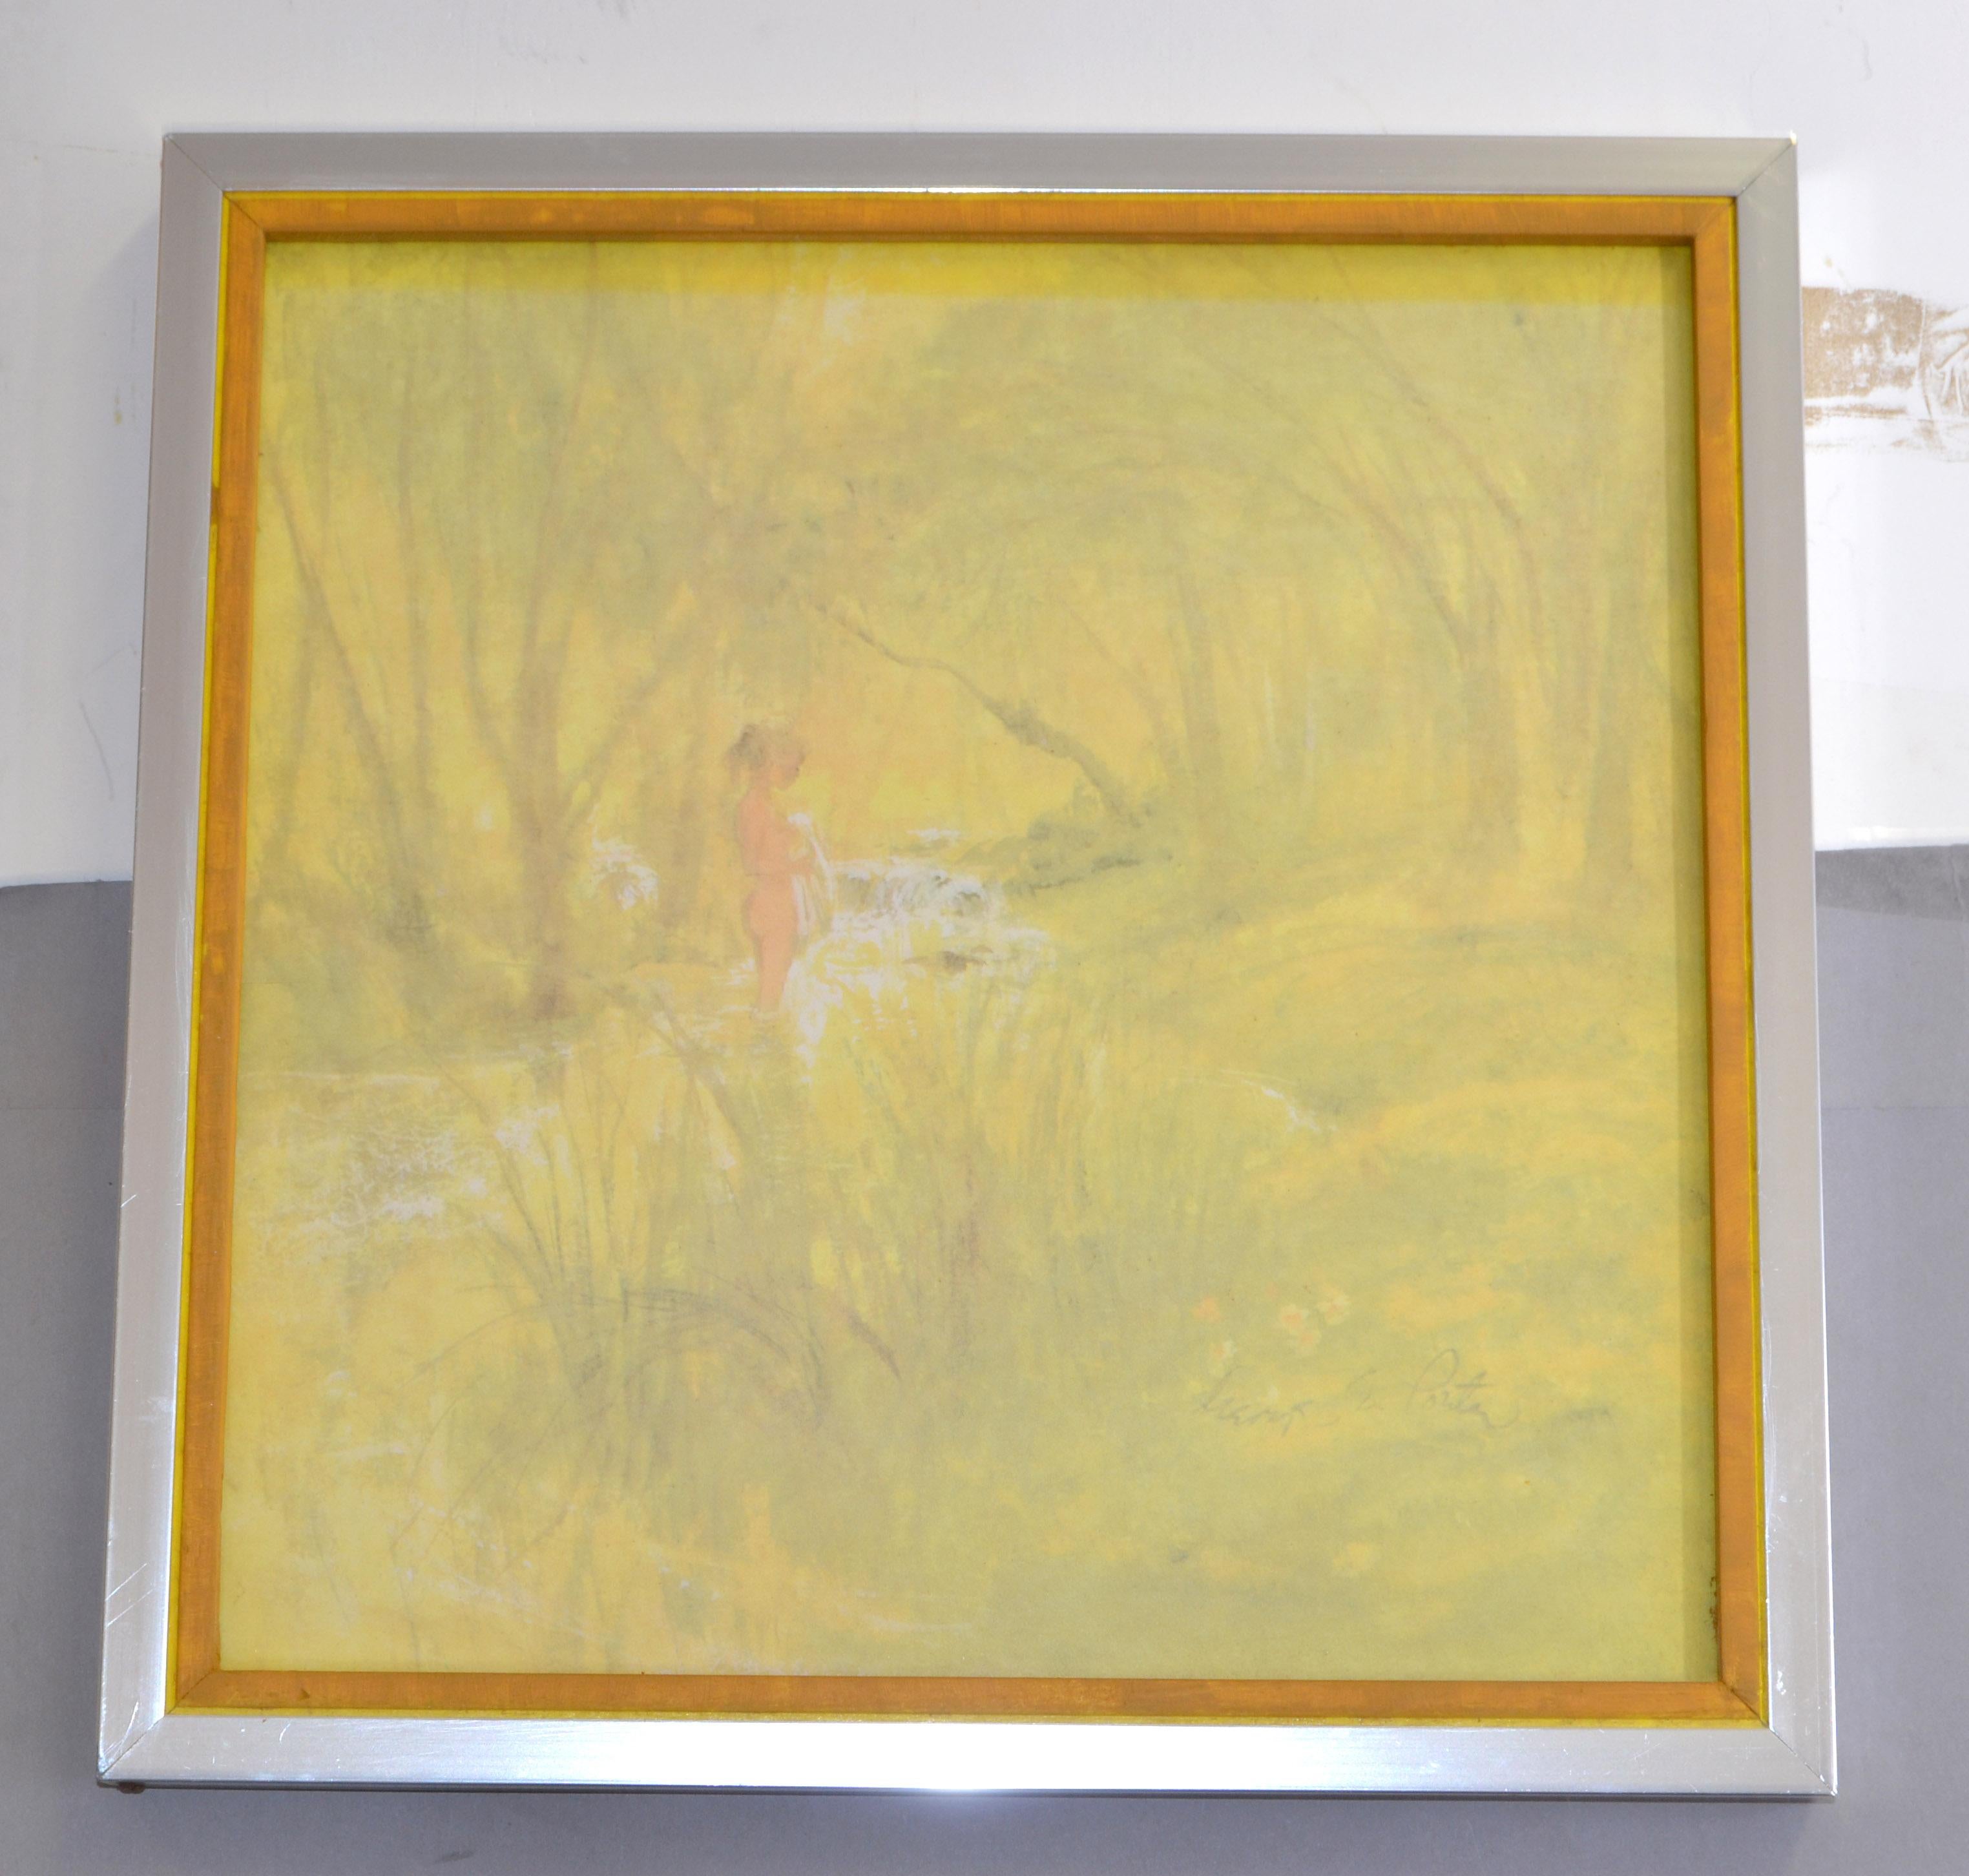 Chrome Framed Canvas on Board Watercolor Painting Bathing Girl Hues of Yellow For Sale 4